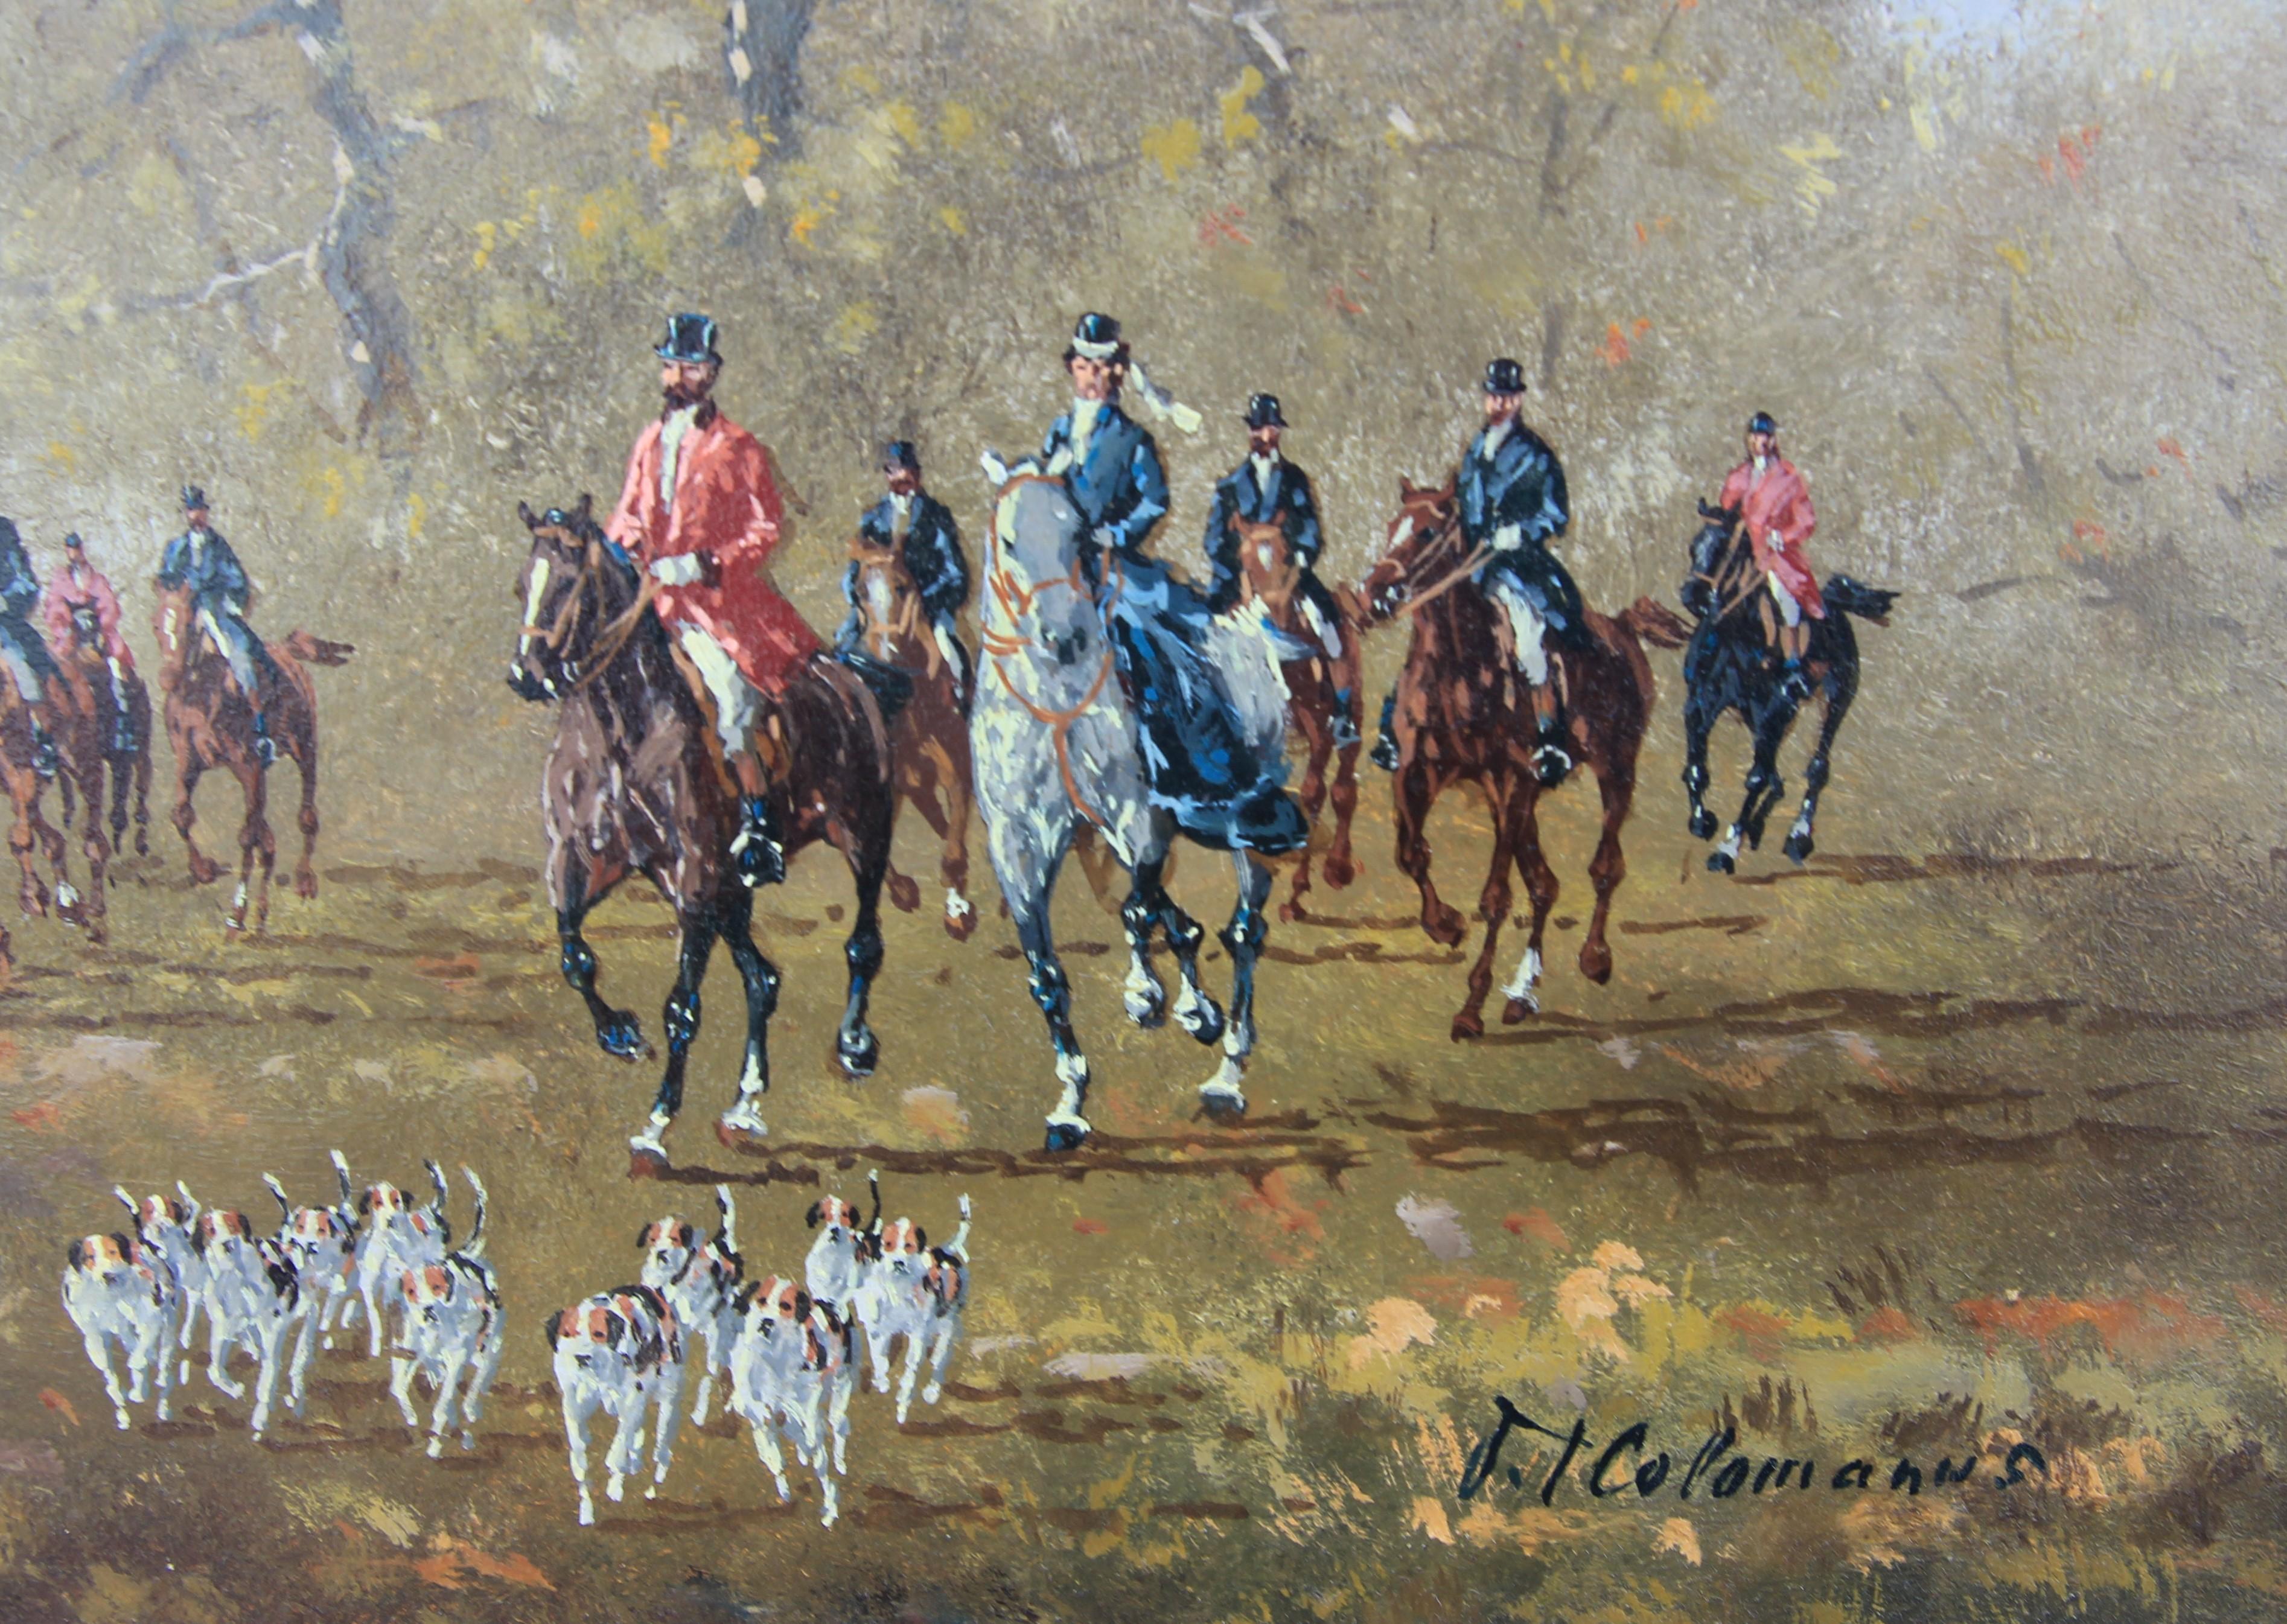 Naturalistic figurative landscape painting by Hungarian artist Kalan Vecsey. The work features a well-dressed hunting party on their horses chasing their dogs that have caught the scent of an animal. Signed by artist in lower right corner. Currently